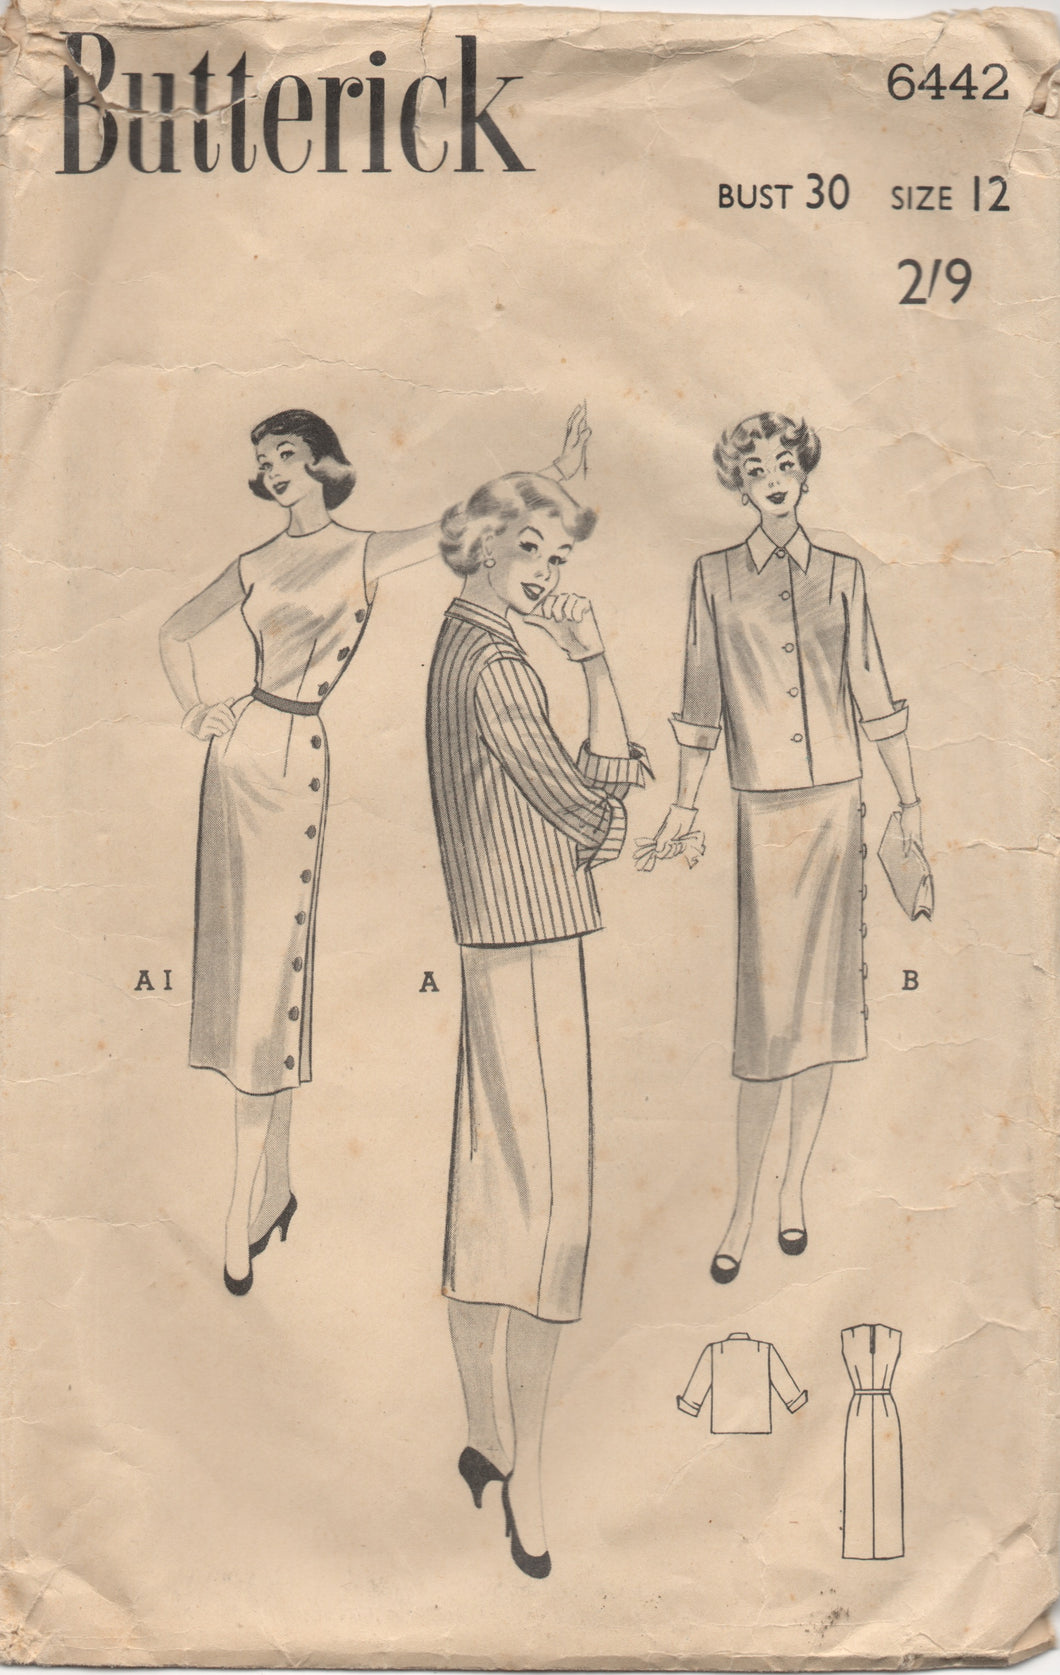 1950's Butterick Side Button Dress with Slim Skirt  and Jacket Pattern - UK EDITION - Bust 30